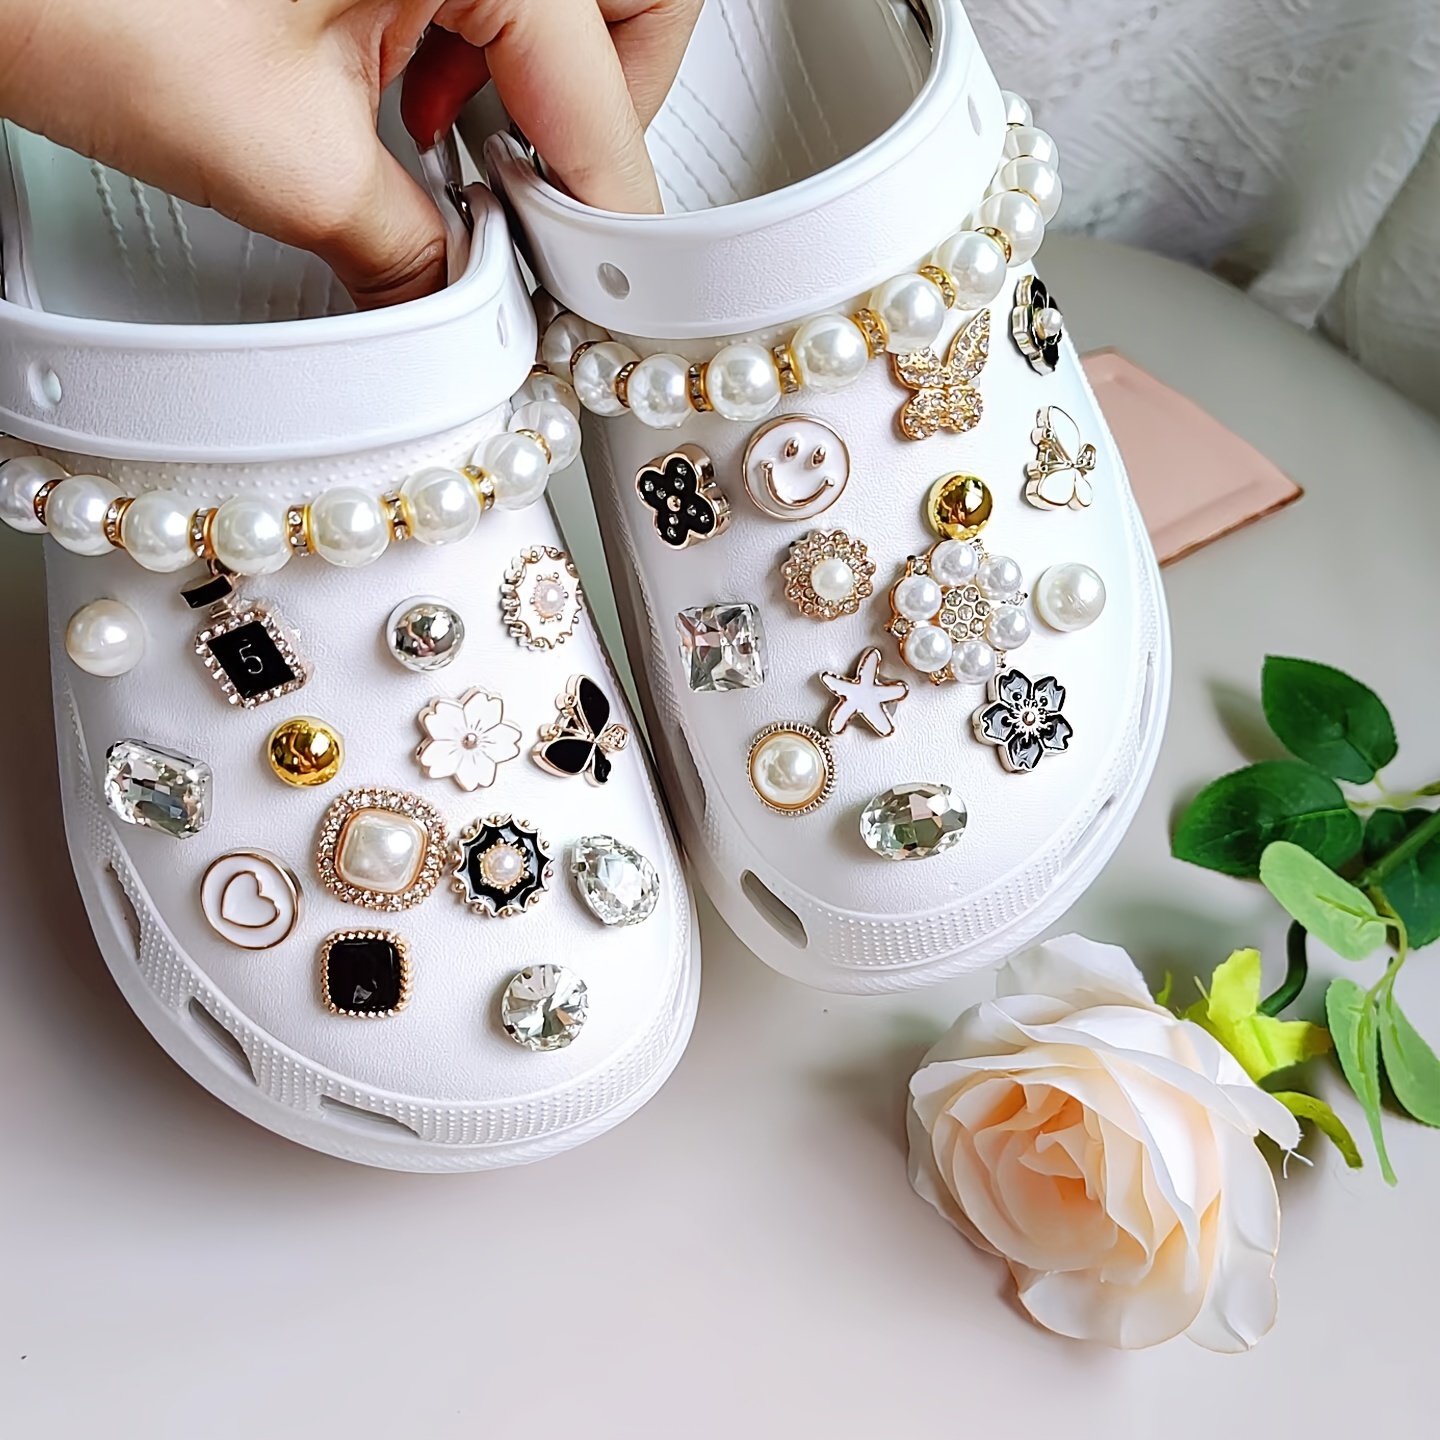 12pcs/set Women's Hole Shoes Decoration Accessories Silver Bear Heart Rhinestone Chain Versatile and Cute Trinkets, Can Be used As Gifts, Party